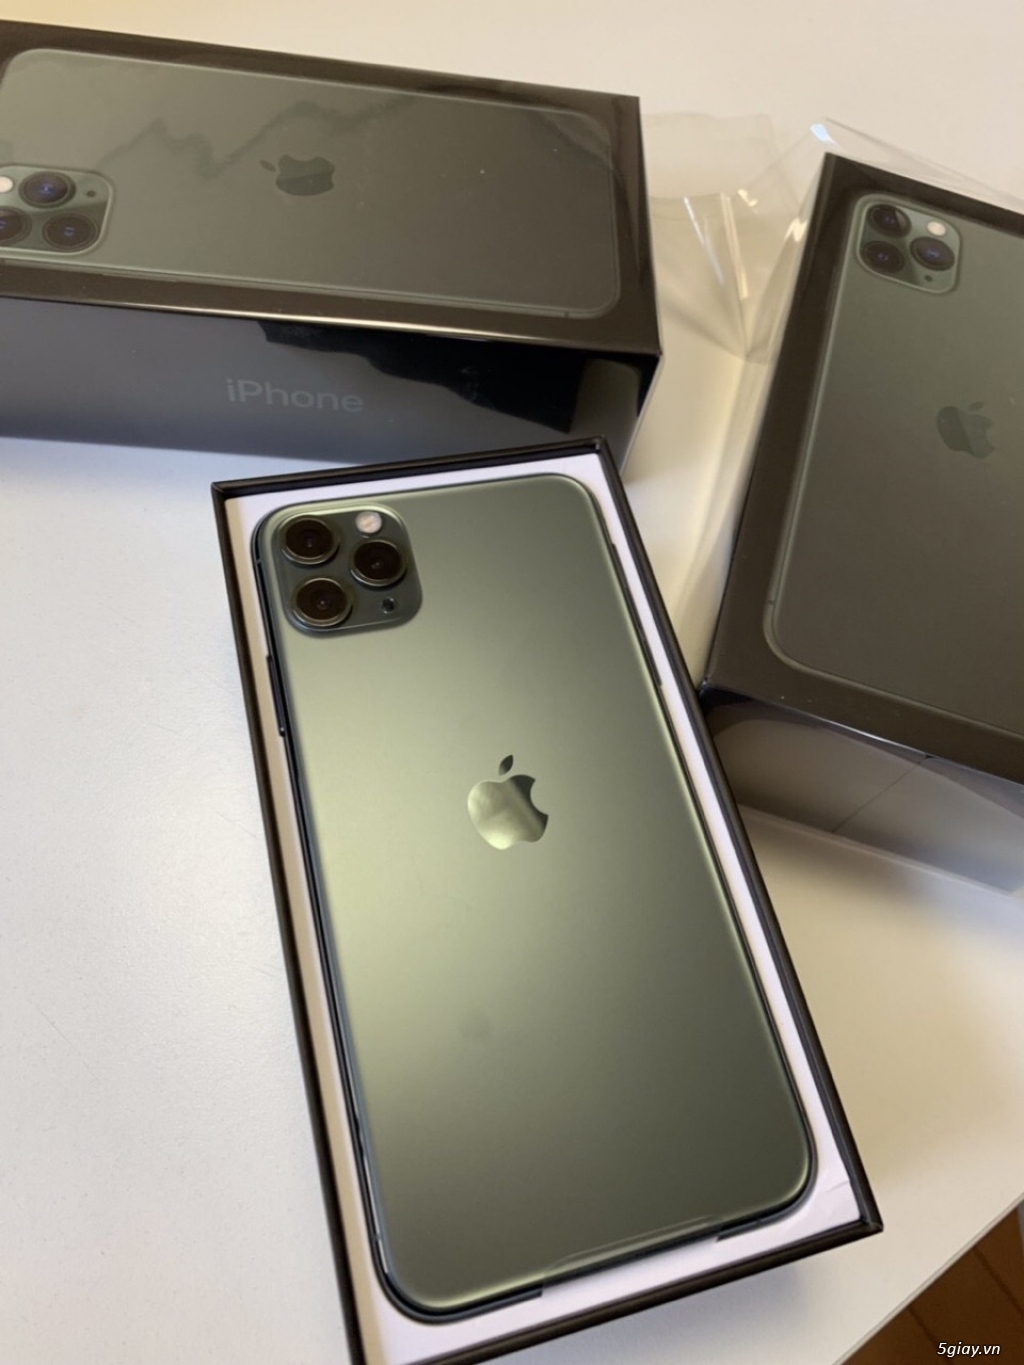 Iphone 11 Pro Max 64g 256g Gray Gold Midnight New 100 Tp Hồ Chi Minh Five Vn